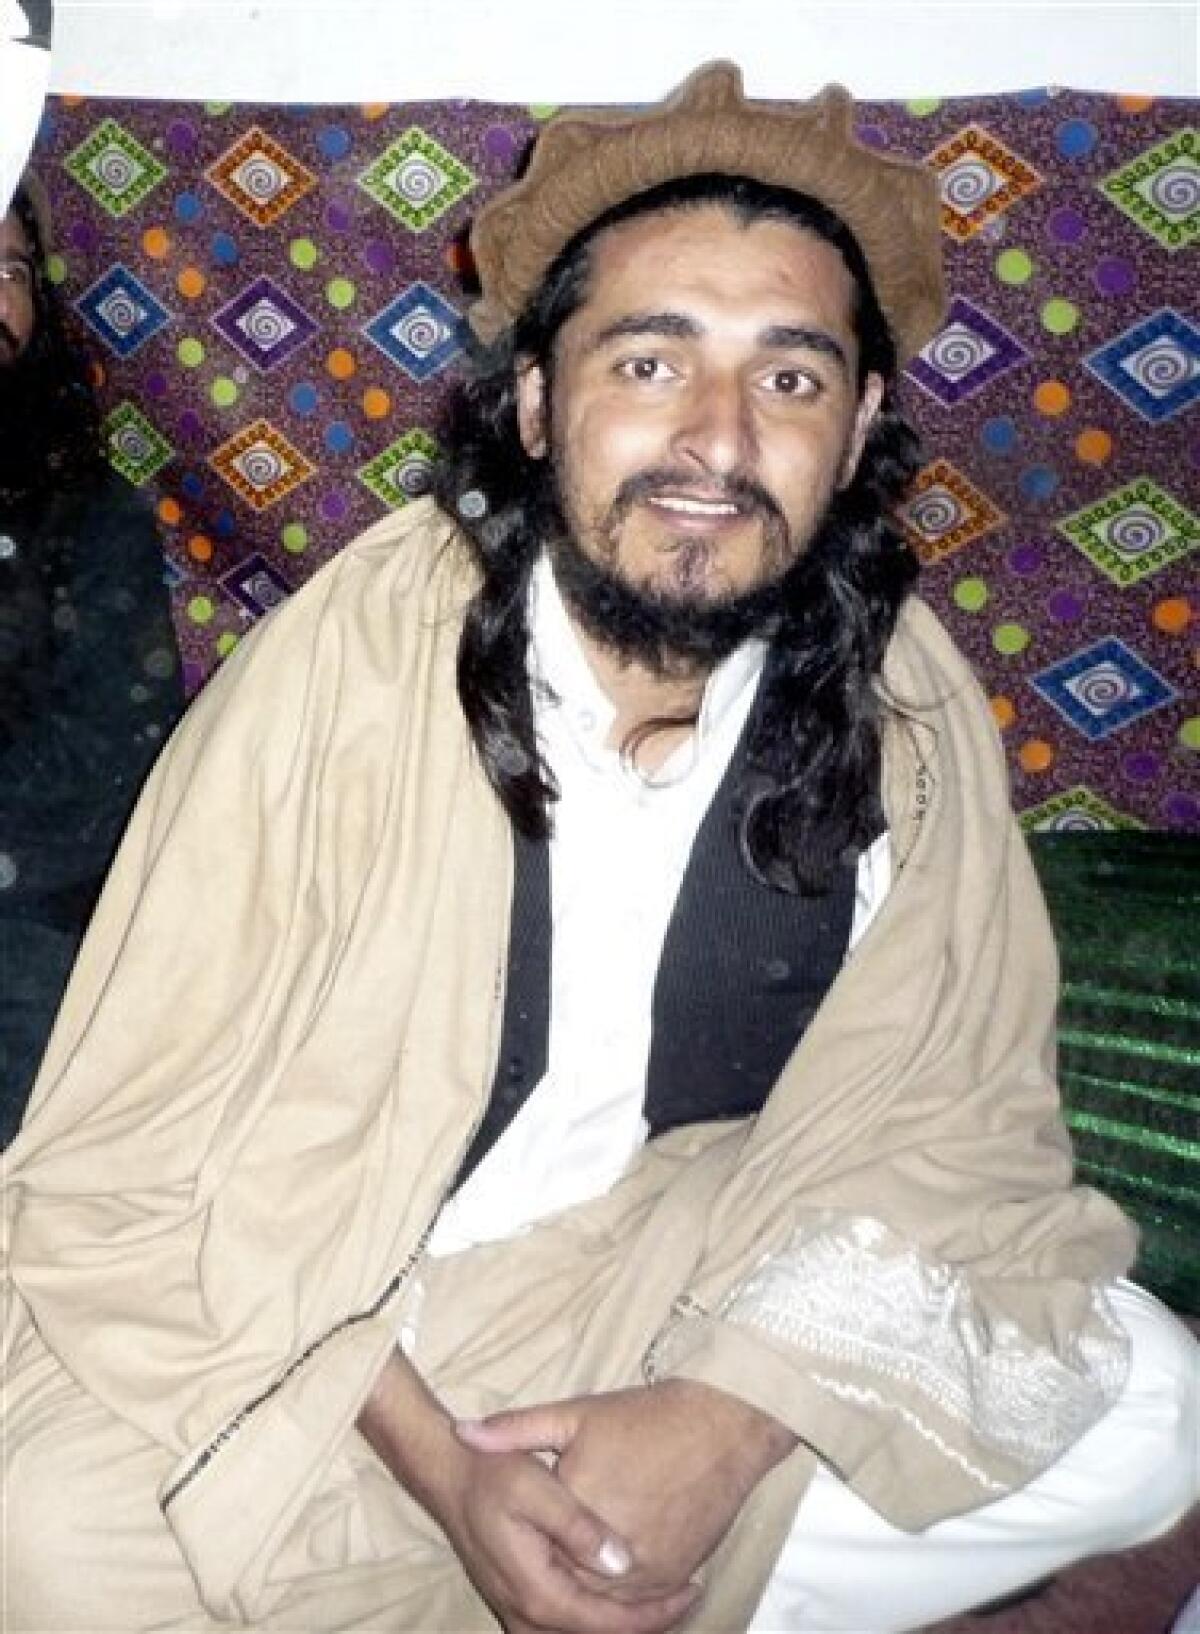 FILE - In this Nov. 26, 2008 file photo, Pakistani Taliban deputy Hakimullah Mehsud is seen in Orakzai tribal region of Pakistan. Mehsud has been appointed the new head of the militant group, media reports said Saturday, Aug. 22, 2009, weeks after Washington and Islamabad said the militants' chief, Baitullah Mehsud, was almost certainly killed by a recent missile strike. (AP Photo/Ishtiaq Mehsud, File)